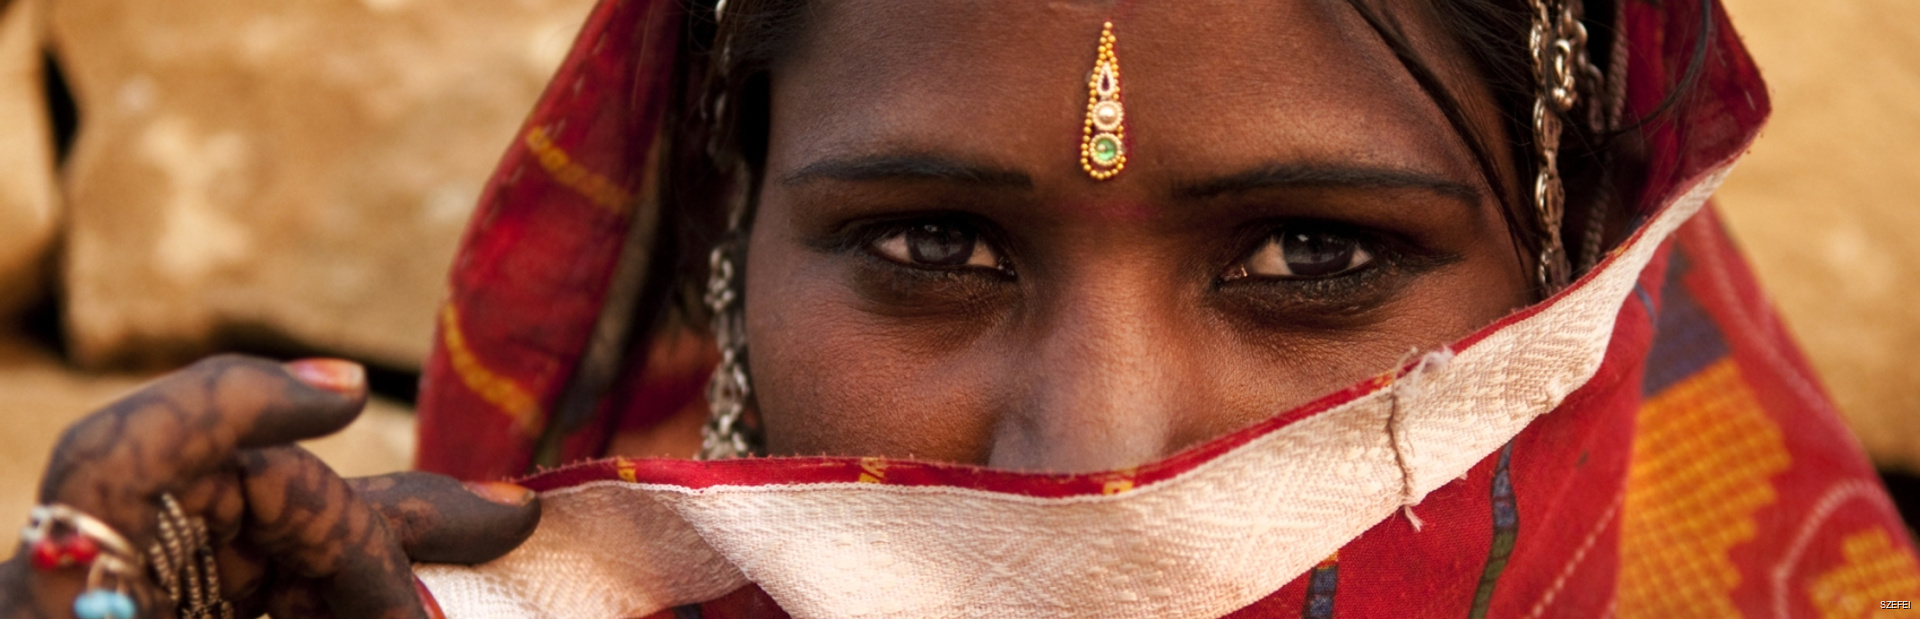 Traditional Indian woman covered her face